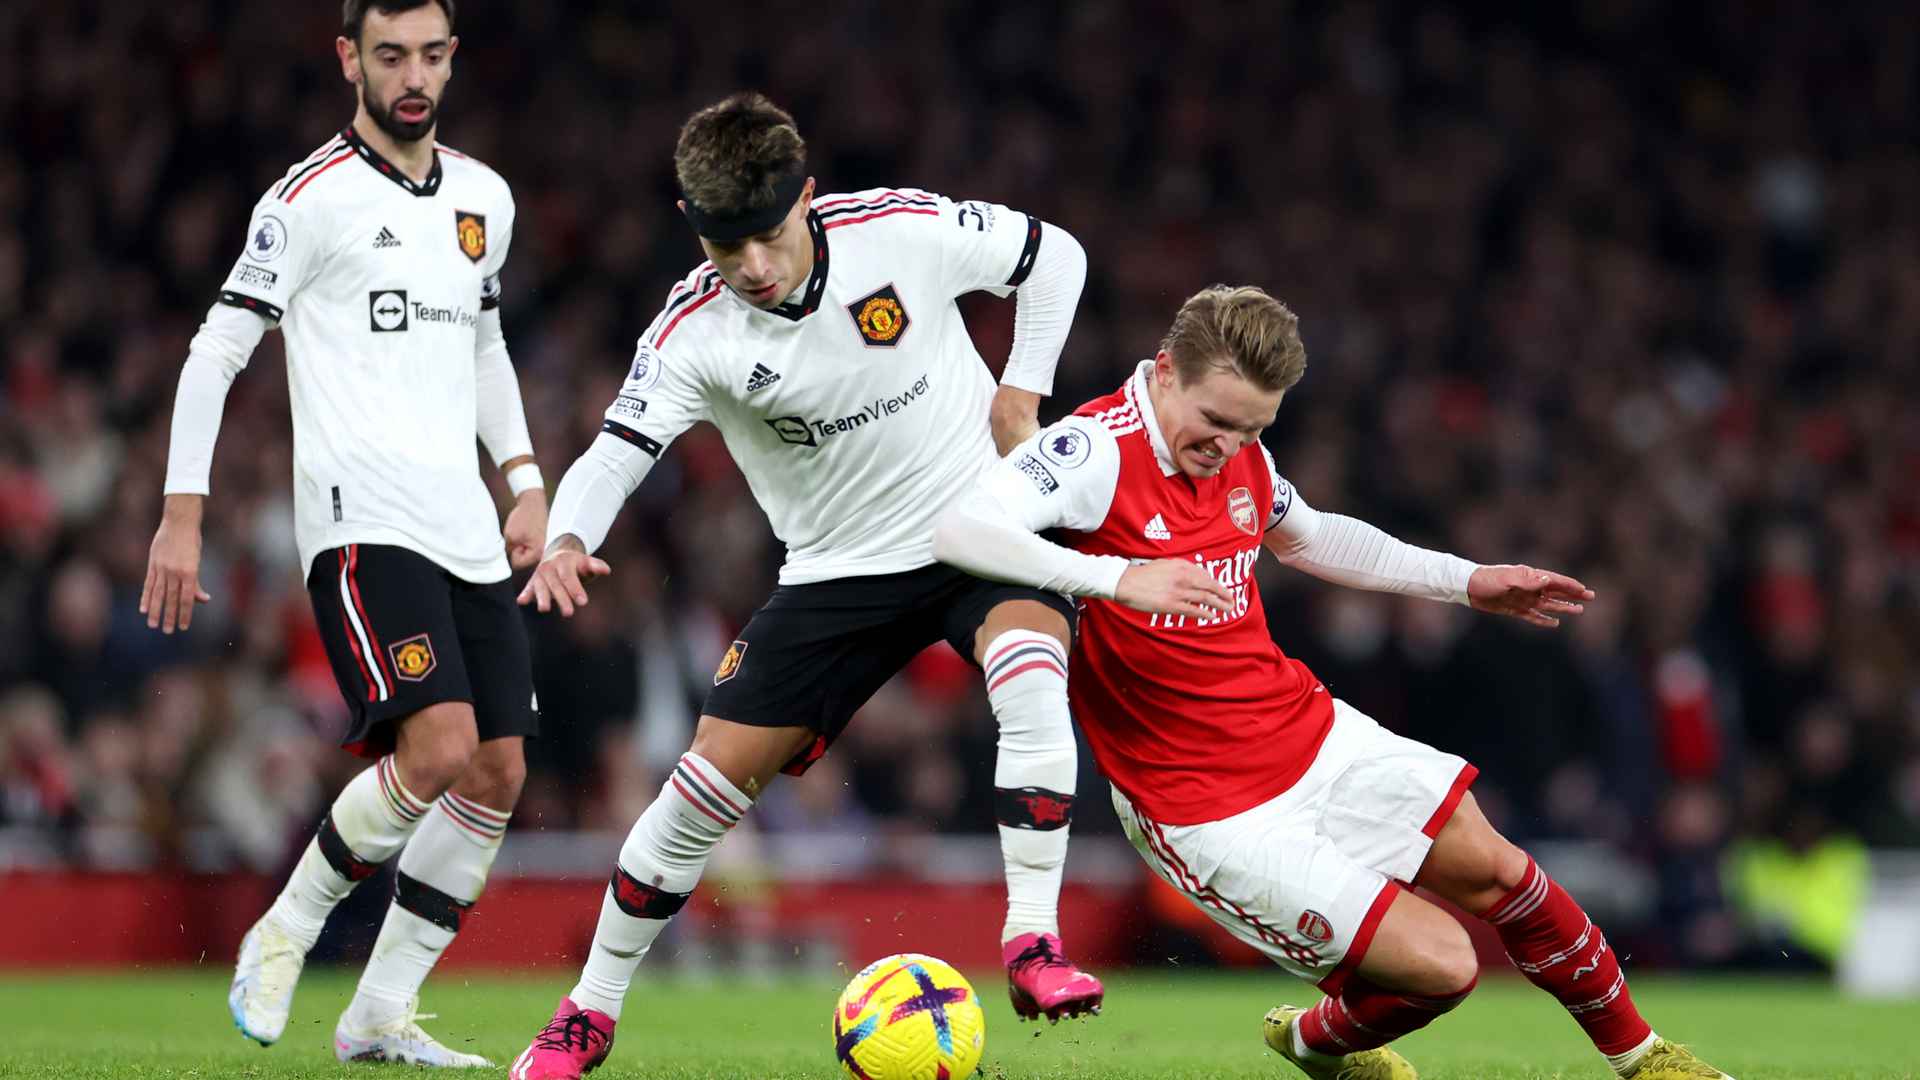 Arsenal 3 - 1 Manchester United - Match Report